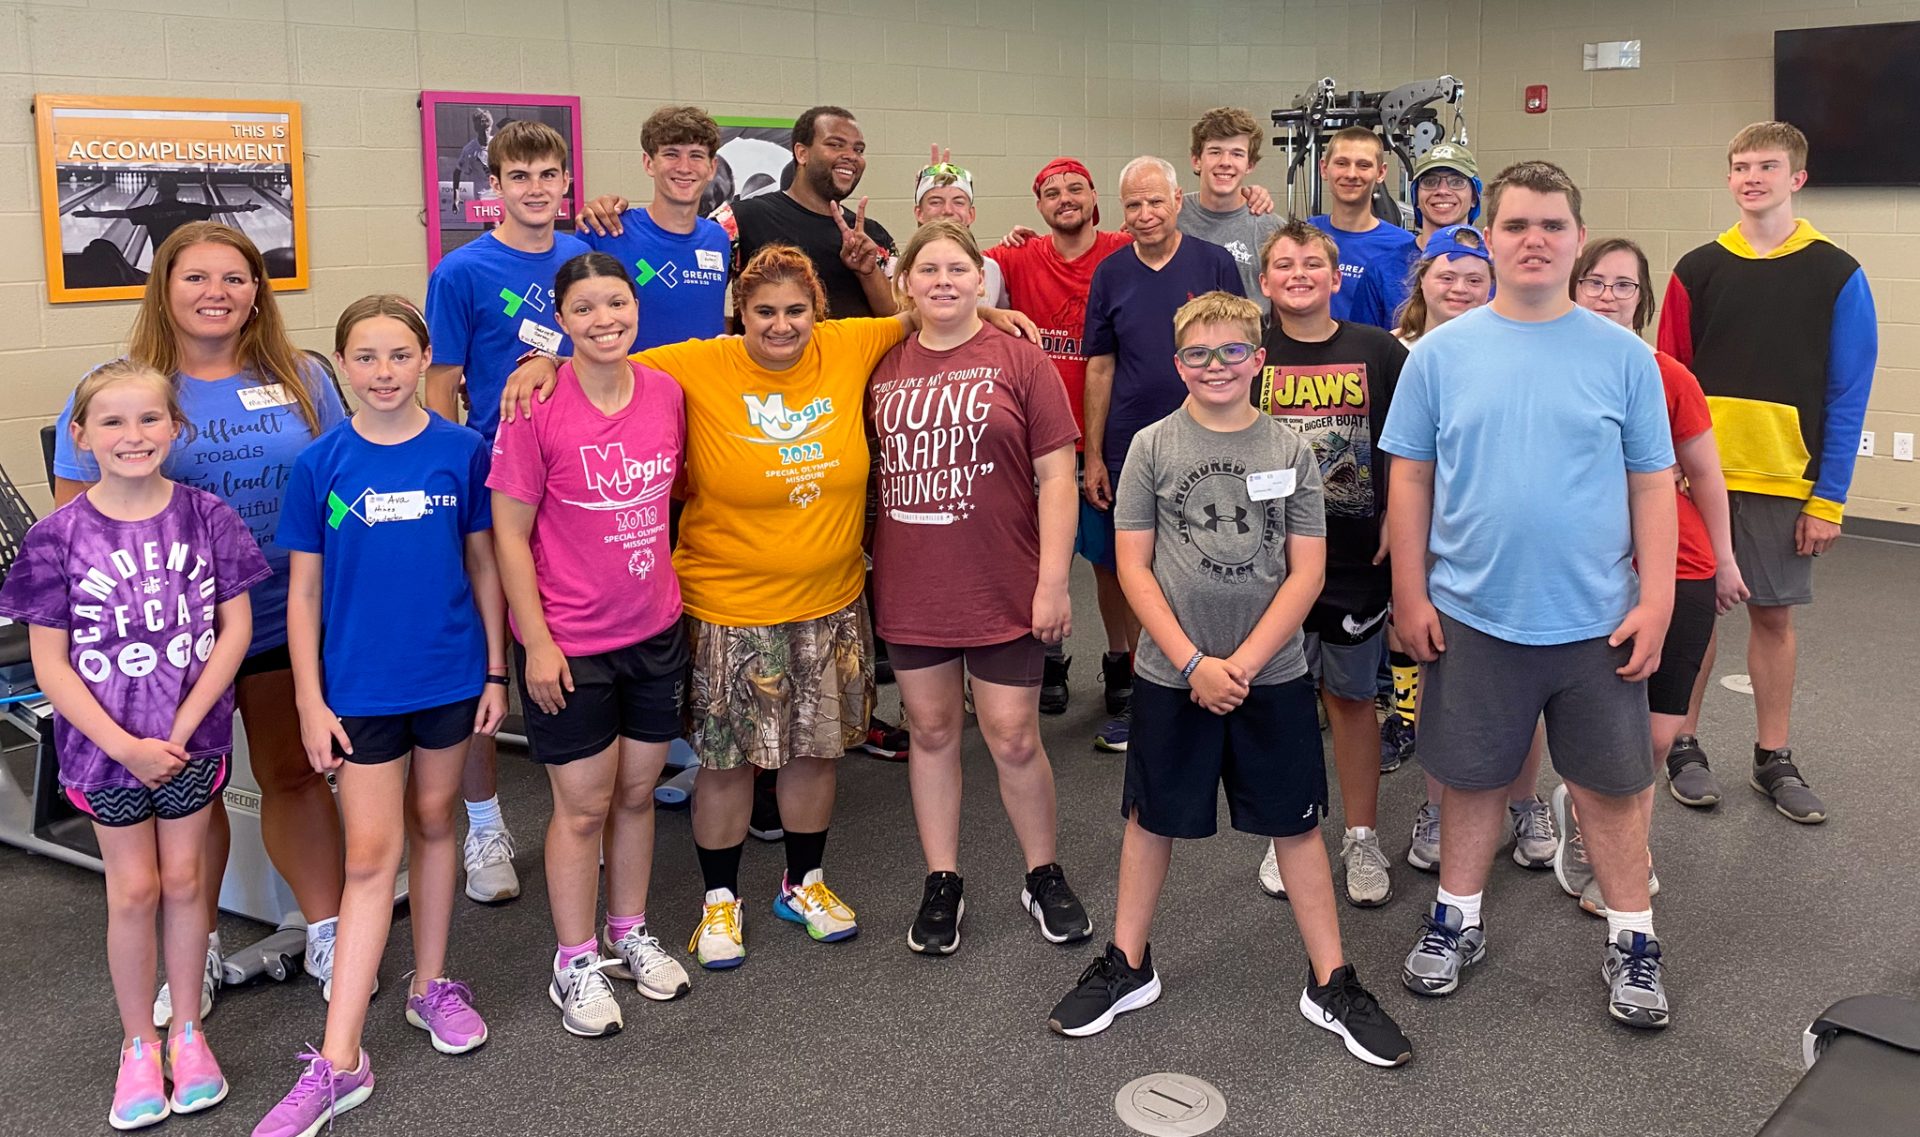 (AUDIO): Special Olympians enjoying sports at camp, while learning life skills